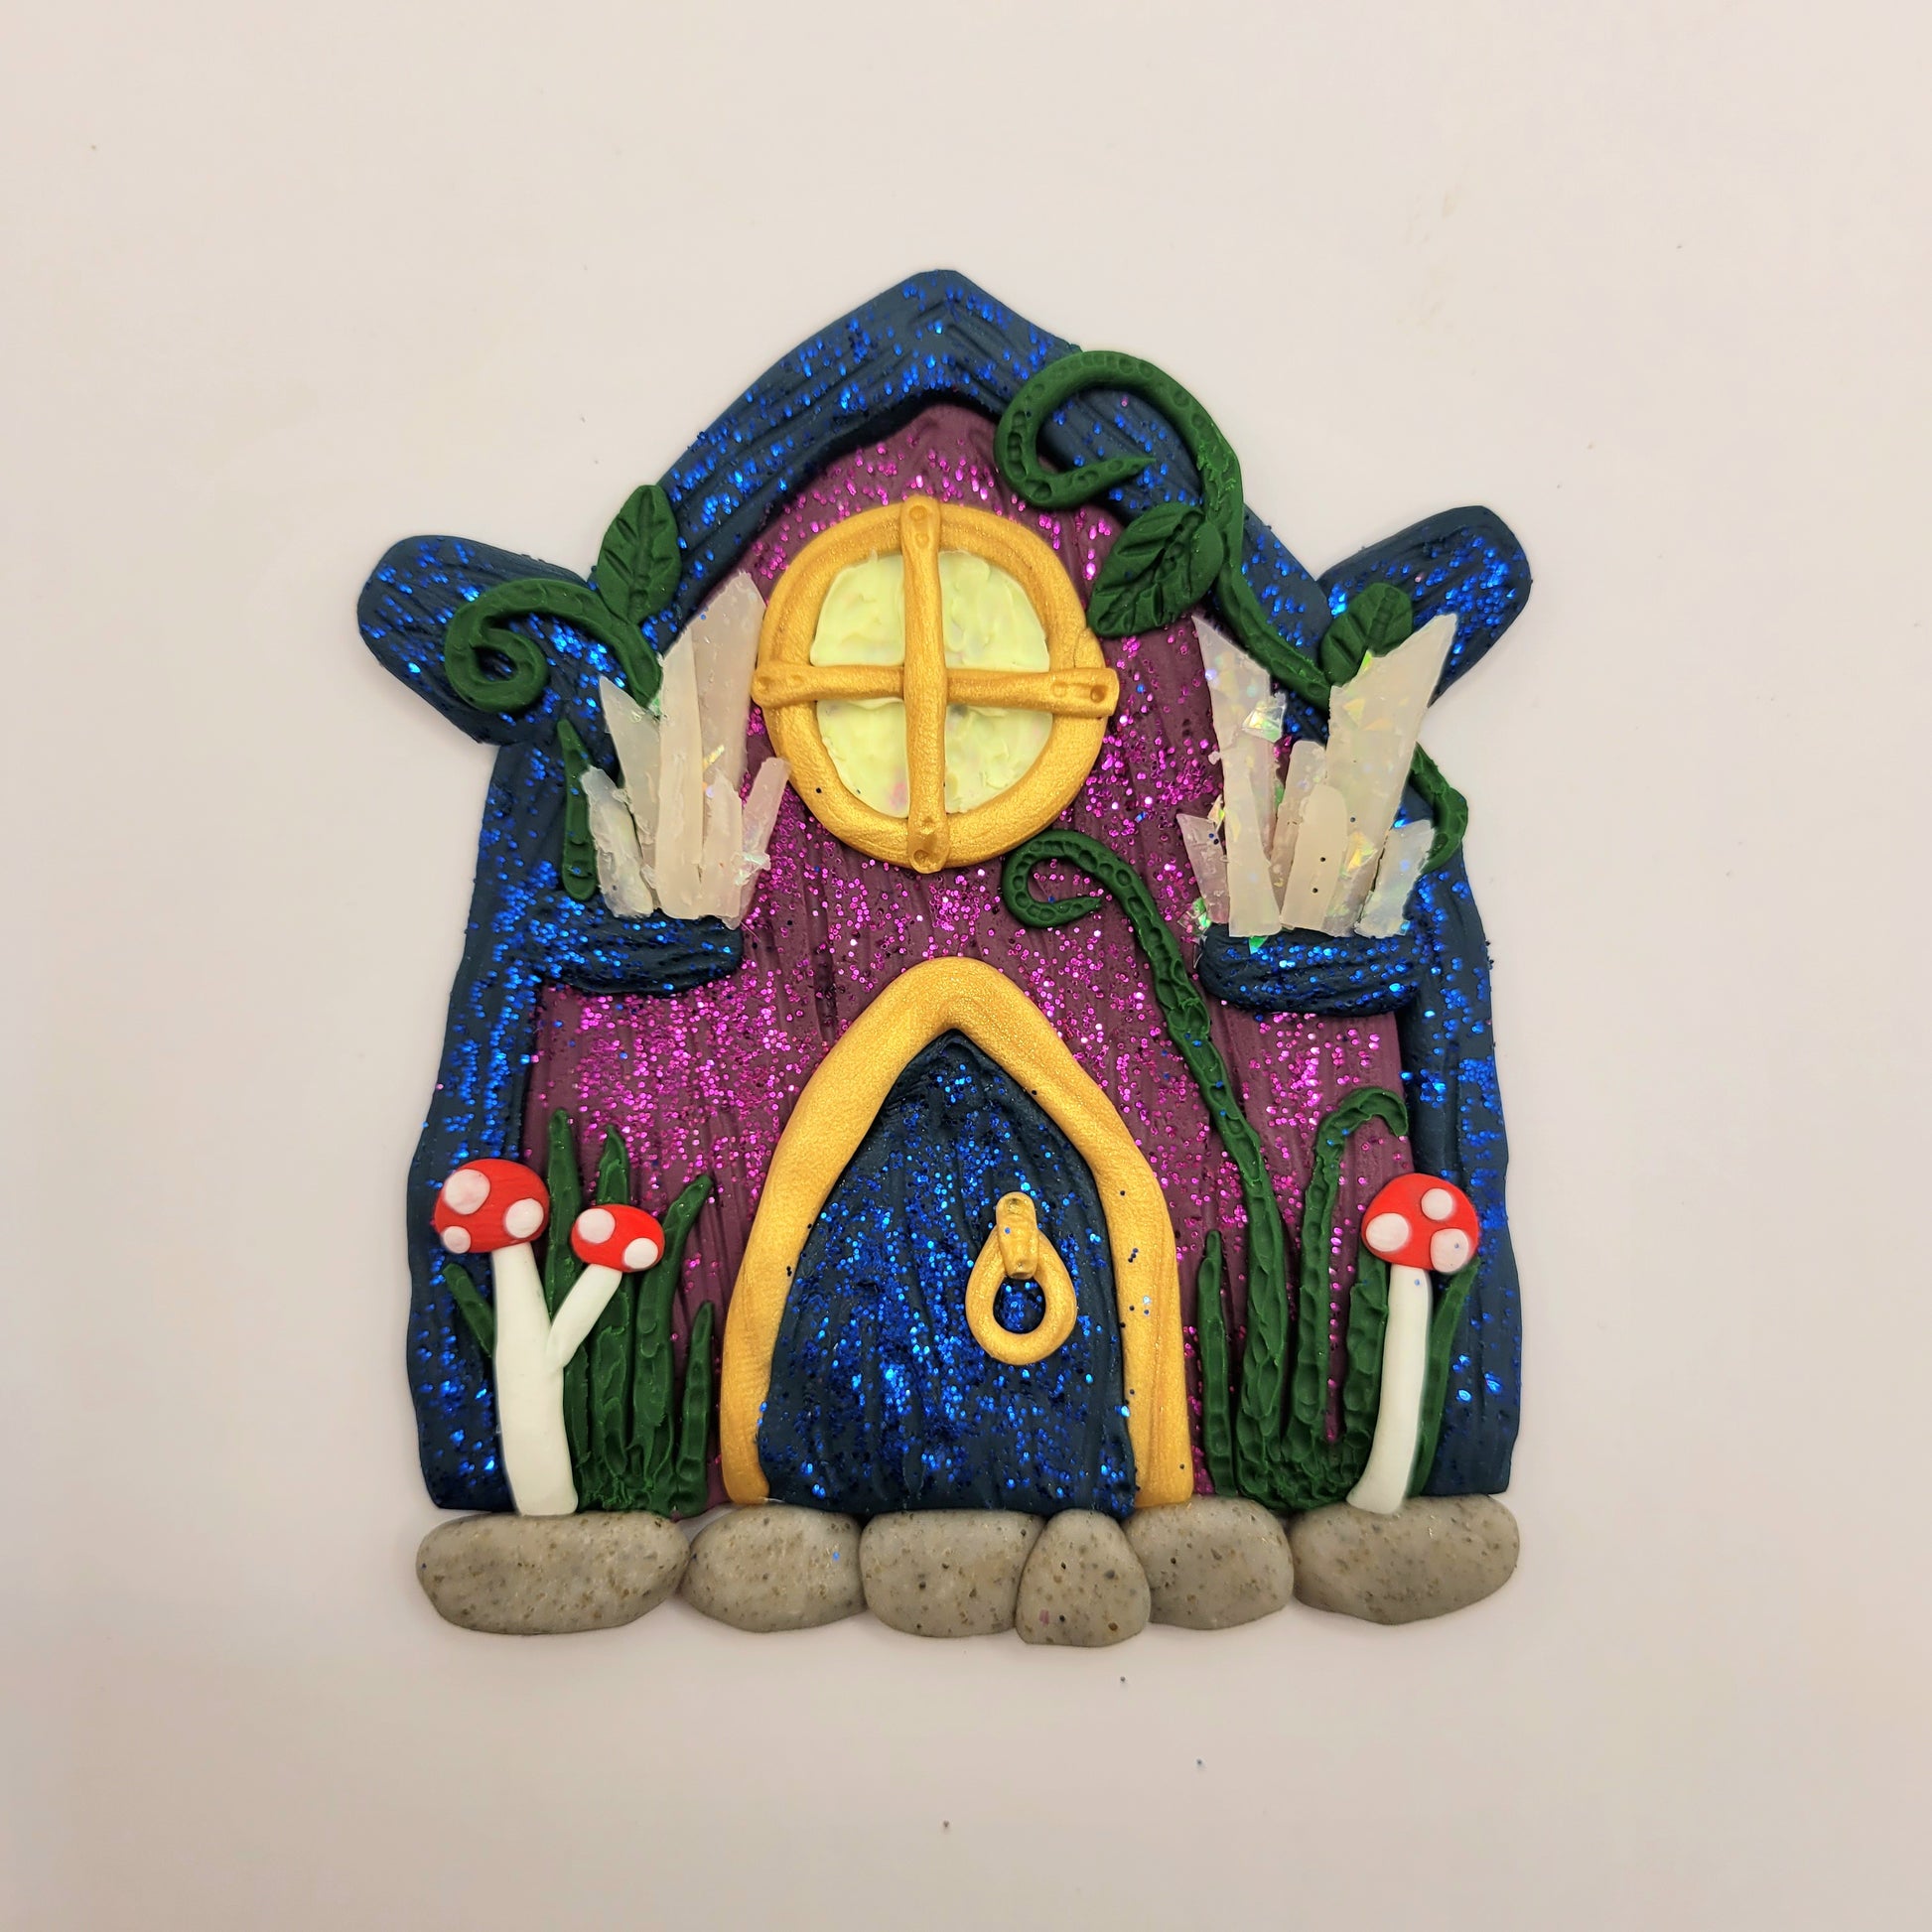 The fairy door is shown against a white background. The dark purple door is covered in glitter with a dark blue "wood" roof. It is detailed with gold trim, a window and door, a crystal display, mushrooms, vines and grass.